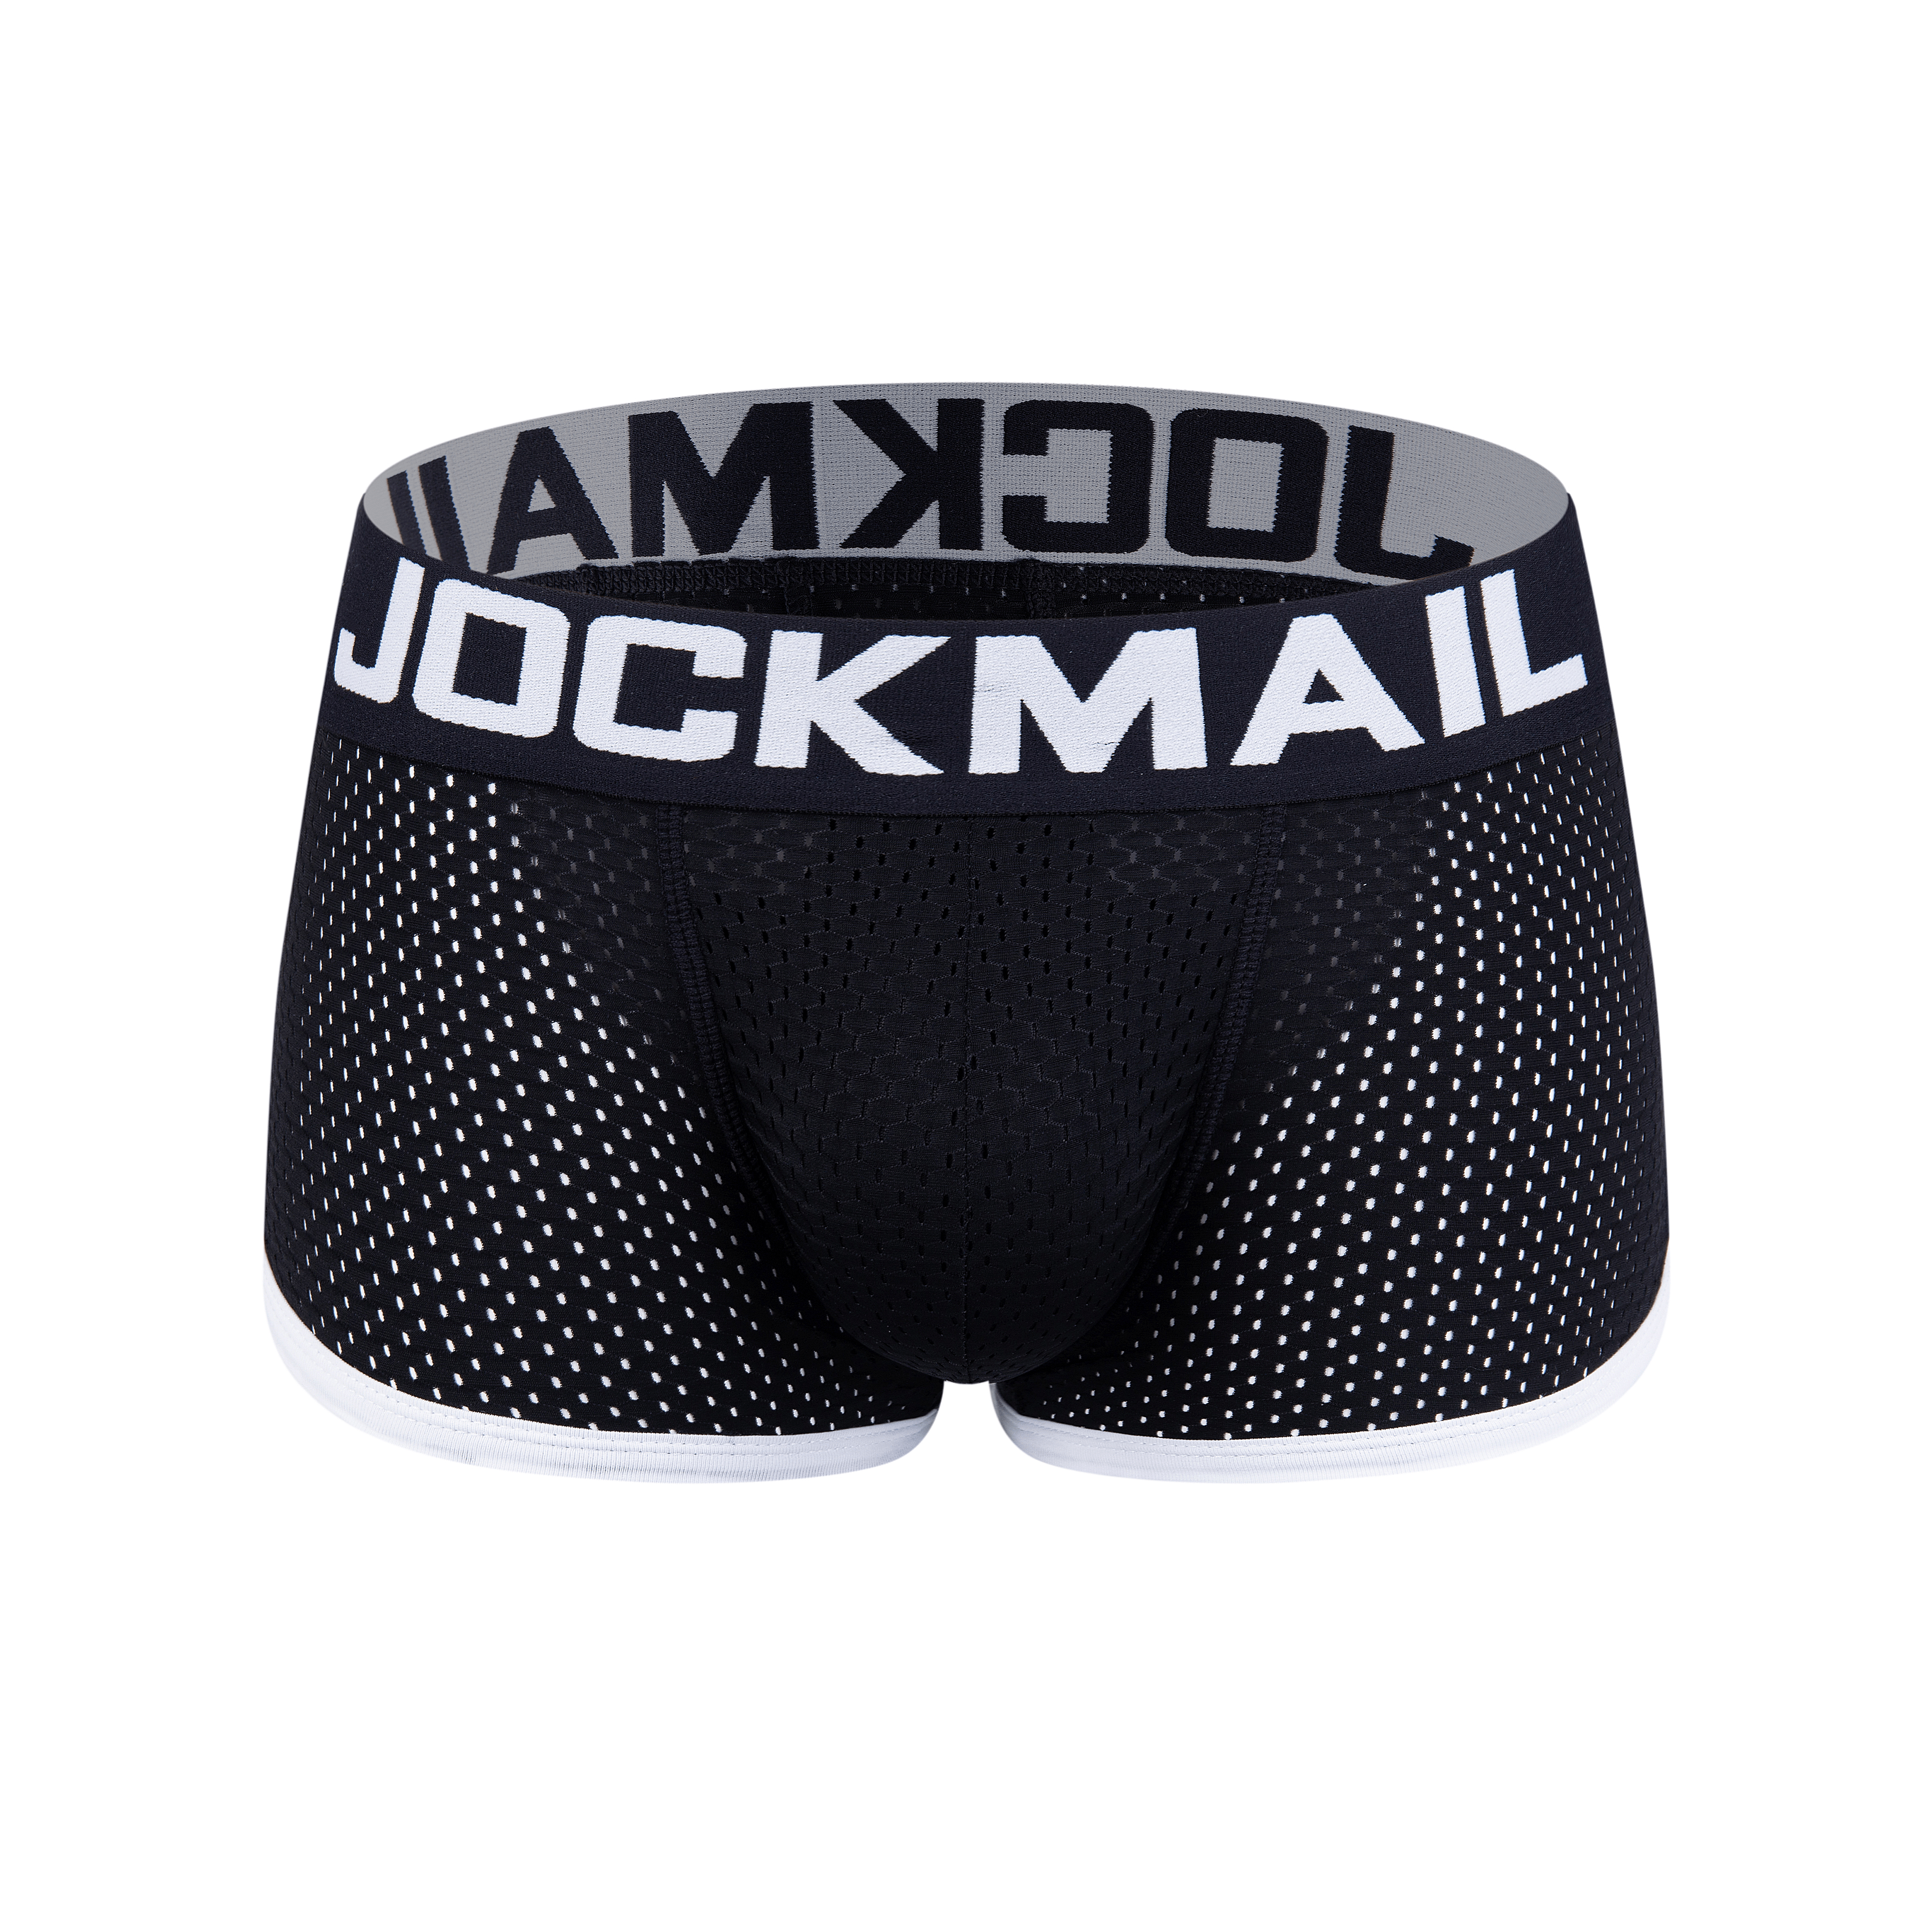 Cuecas Jockmail Brand Mens Roupa Boxadores Trunks Sexy Push Up Cup